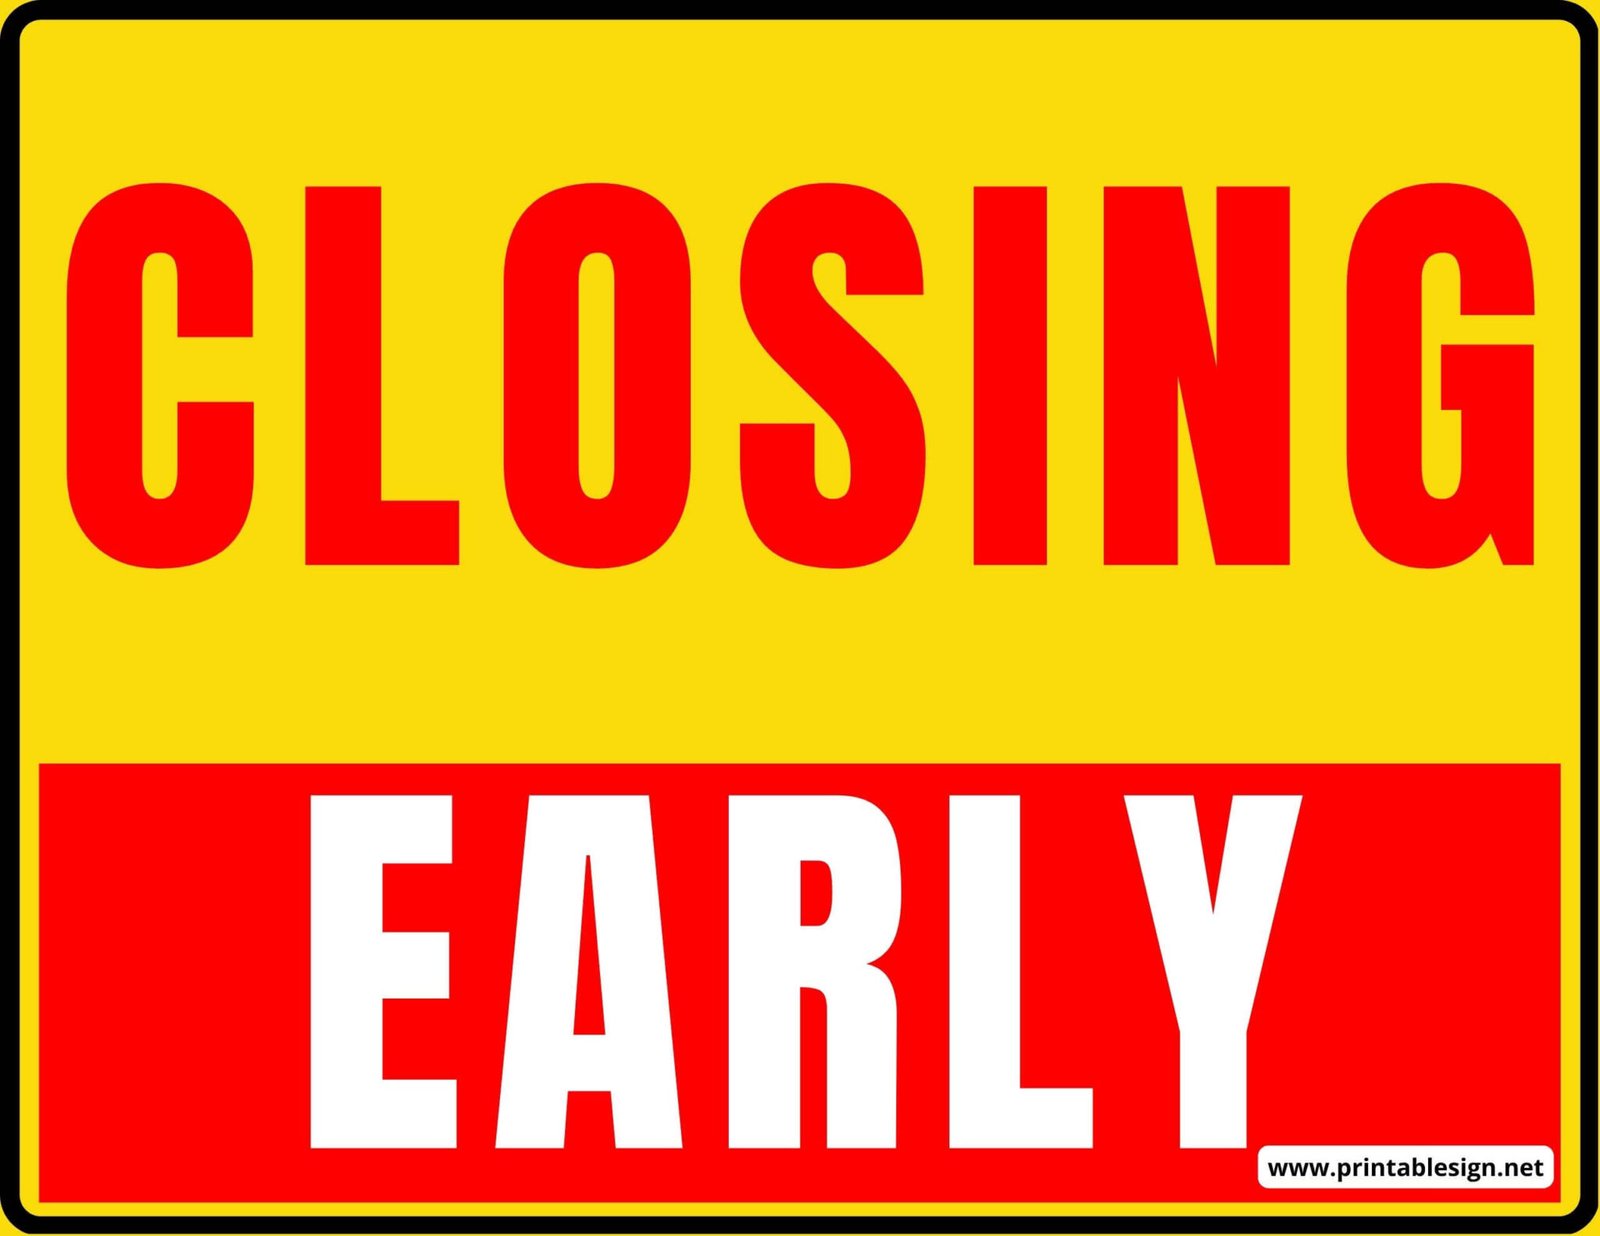 closing-early-sign-template-free